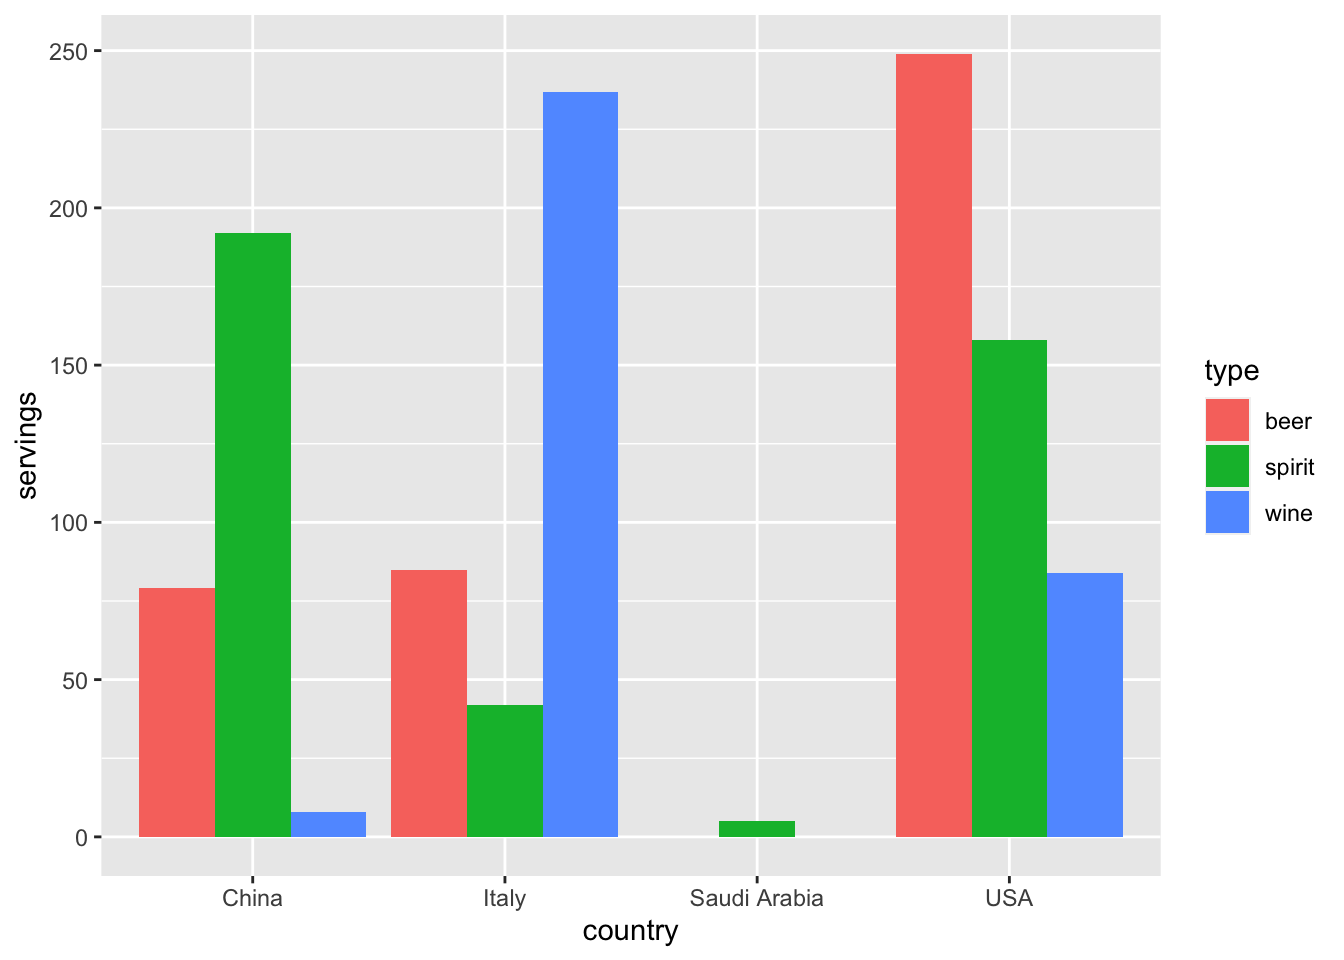 Comparing alcohol consumption in 4 countries using geom_col().